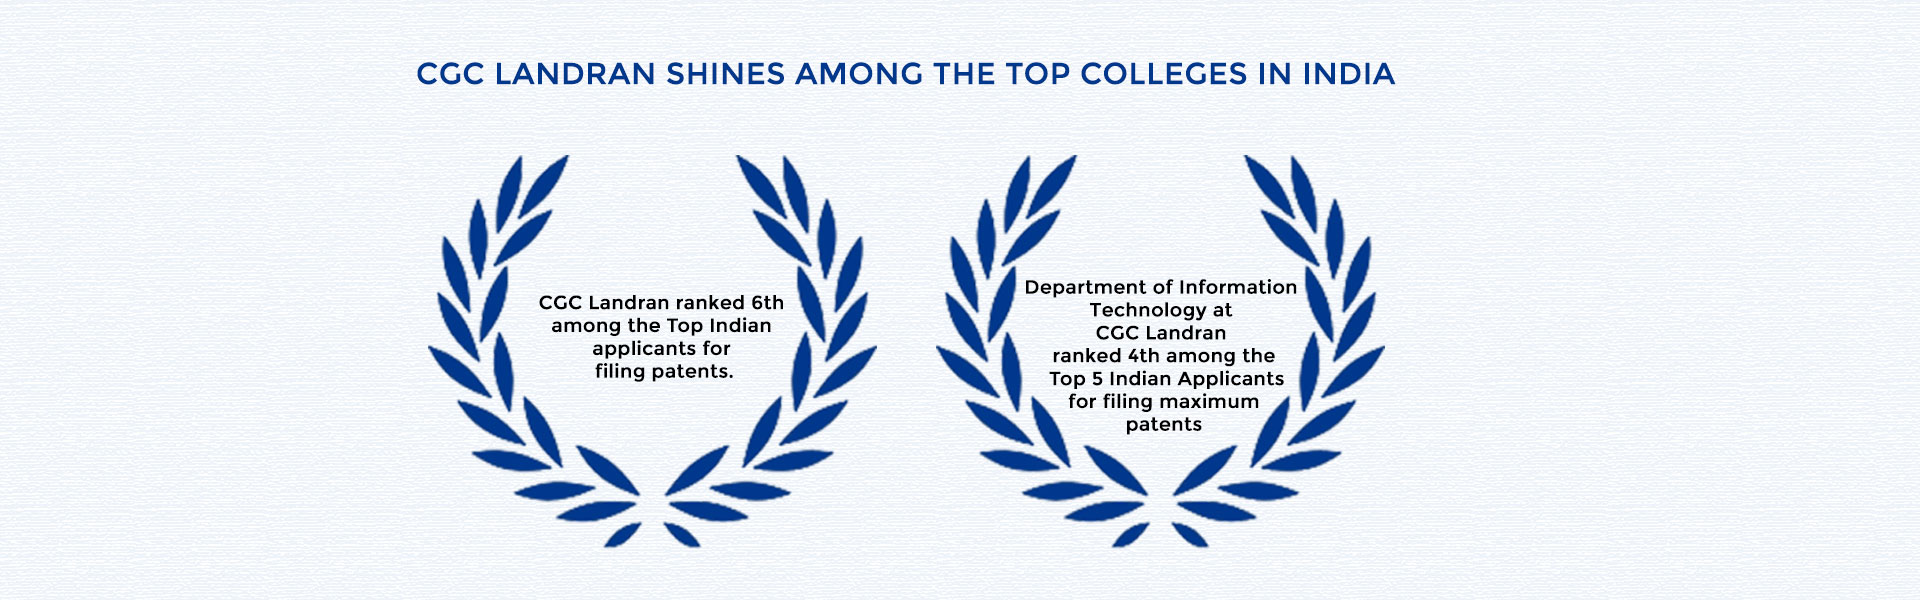 CGC Landran shines among the top colleges in India 